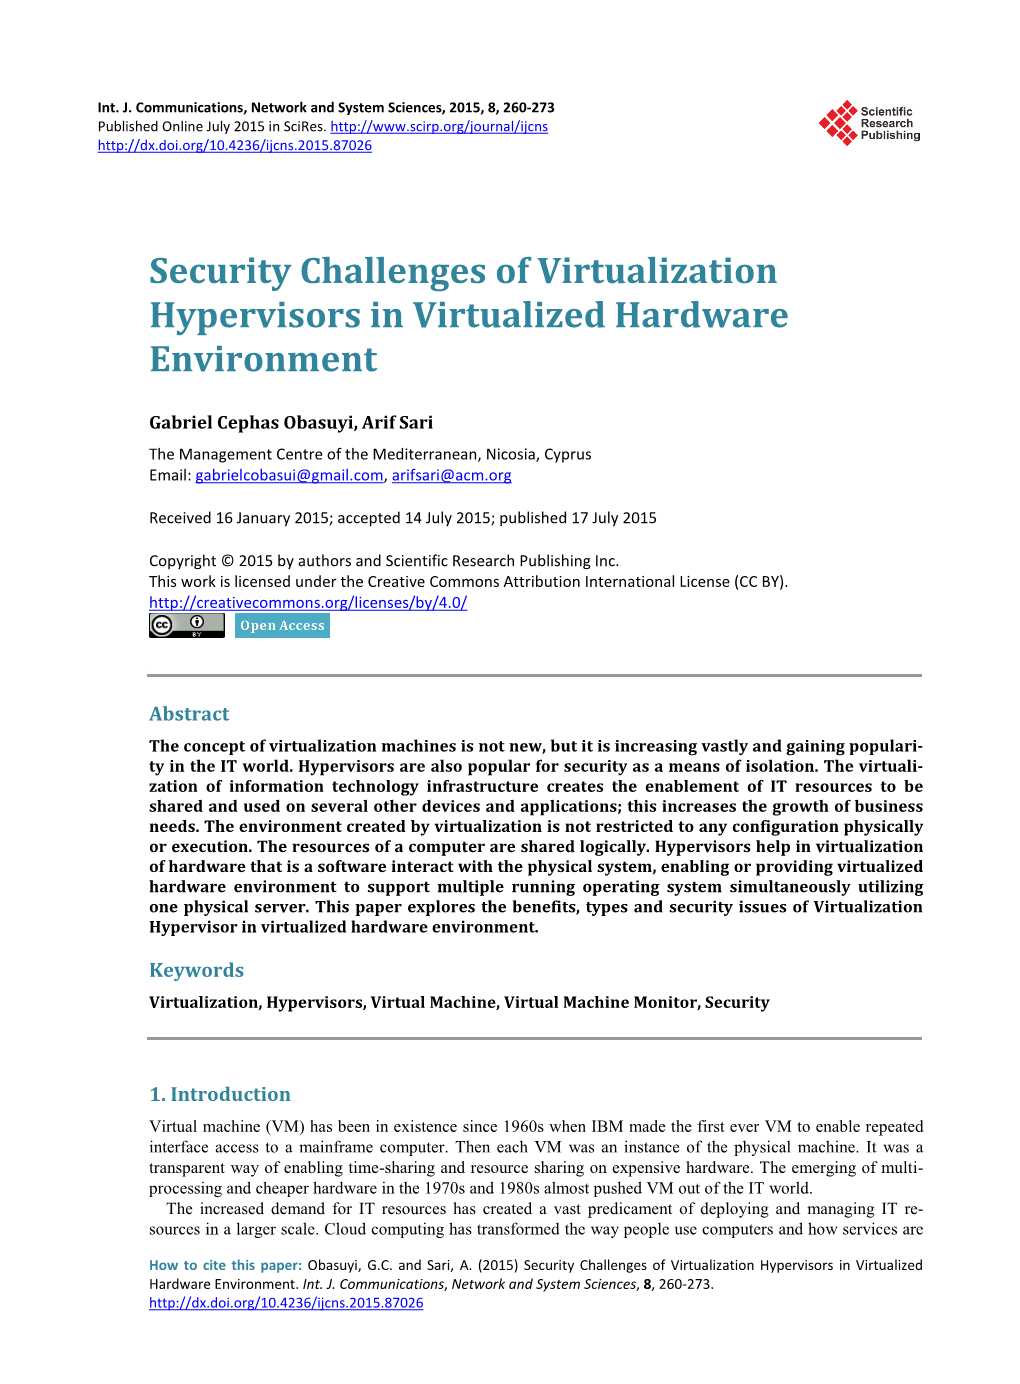 Security Challenges of Virtualization Hypervisors in Virtualized Hardware Environment